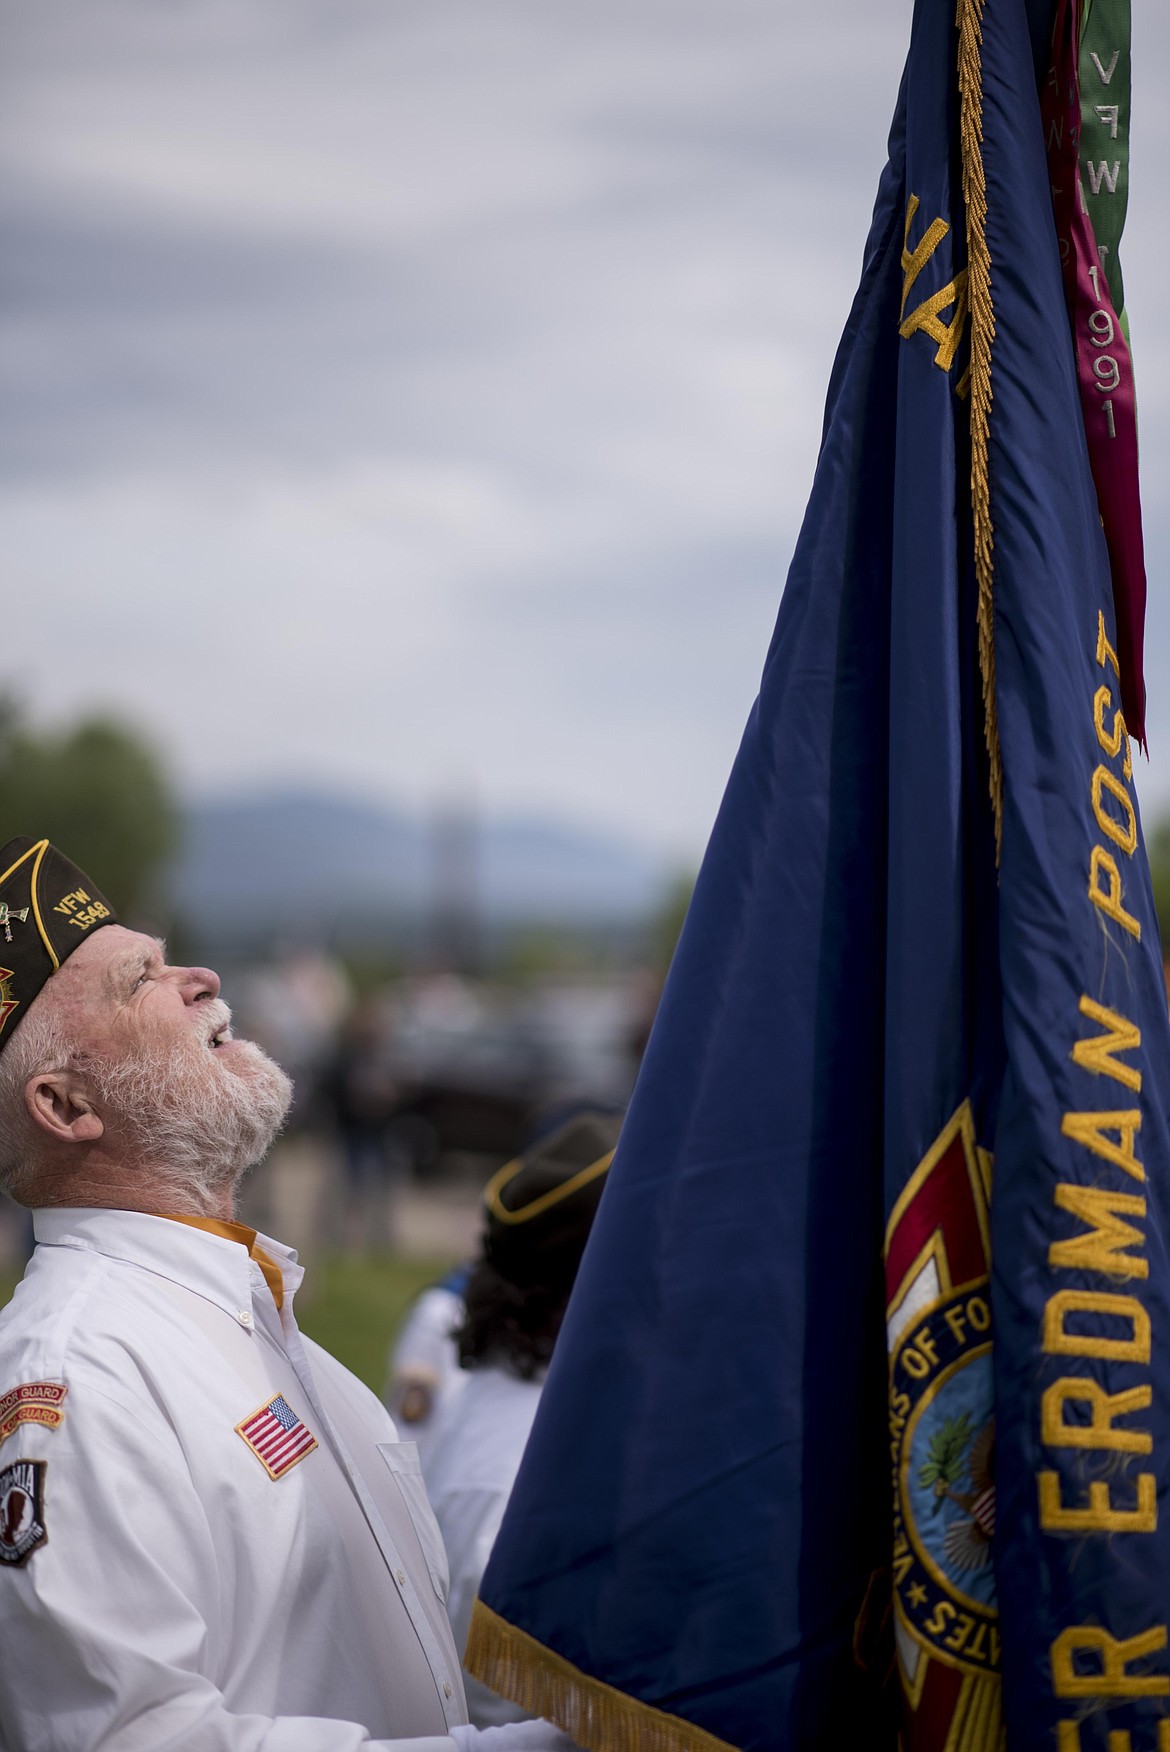 Libby Veterans of Foreign Wars Quartermaster Paul Mammano straightens out his flag during a Memorial Day service, Monday at the Libby Cemetery. (Luke Hollister/The Western News)